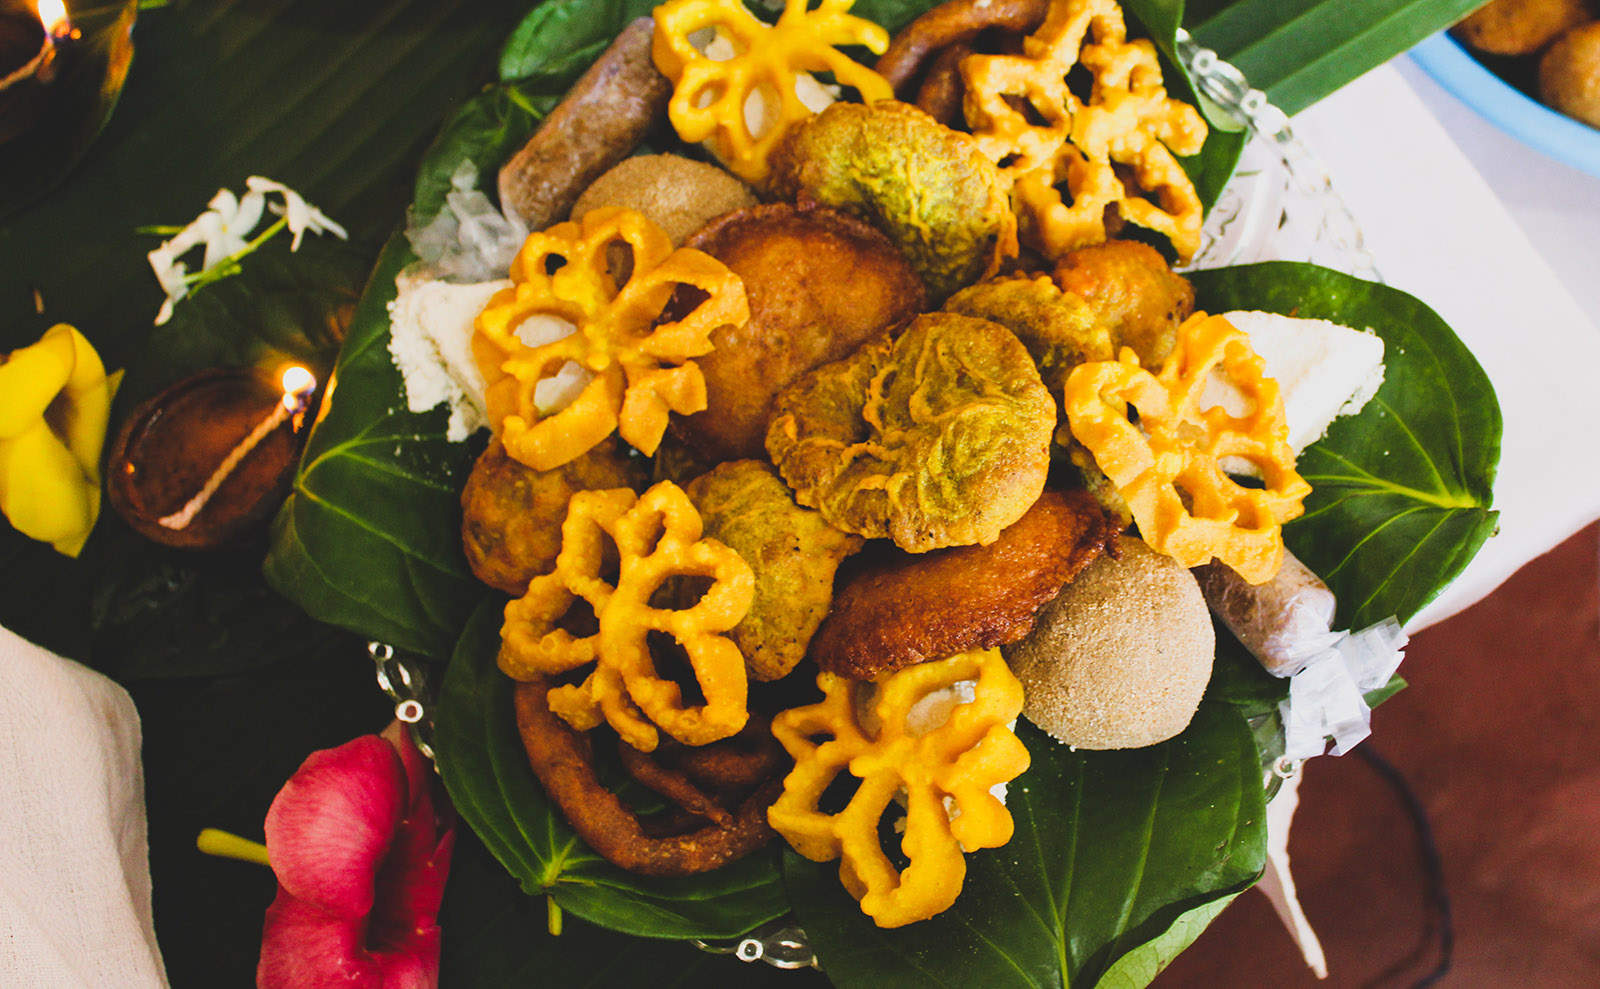 an overhead view of a plate of fried food with orchids next to the plate